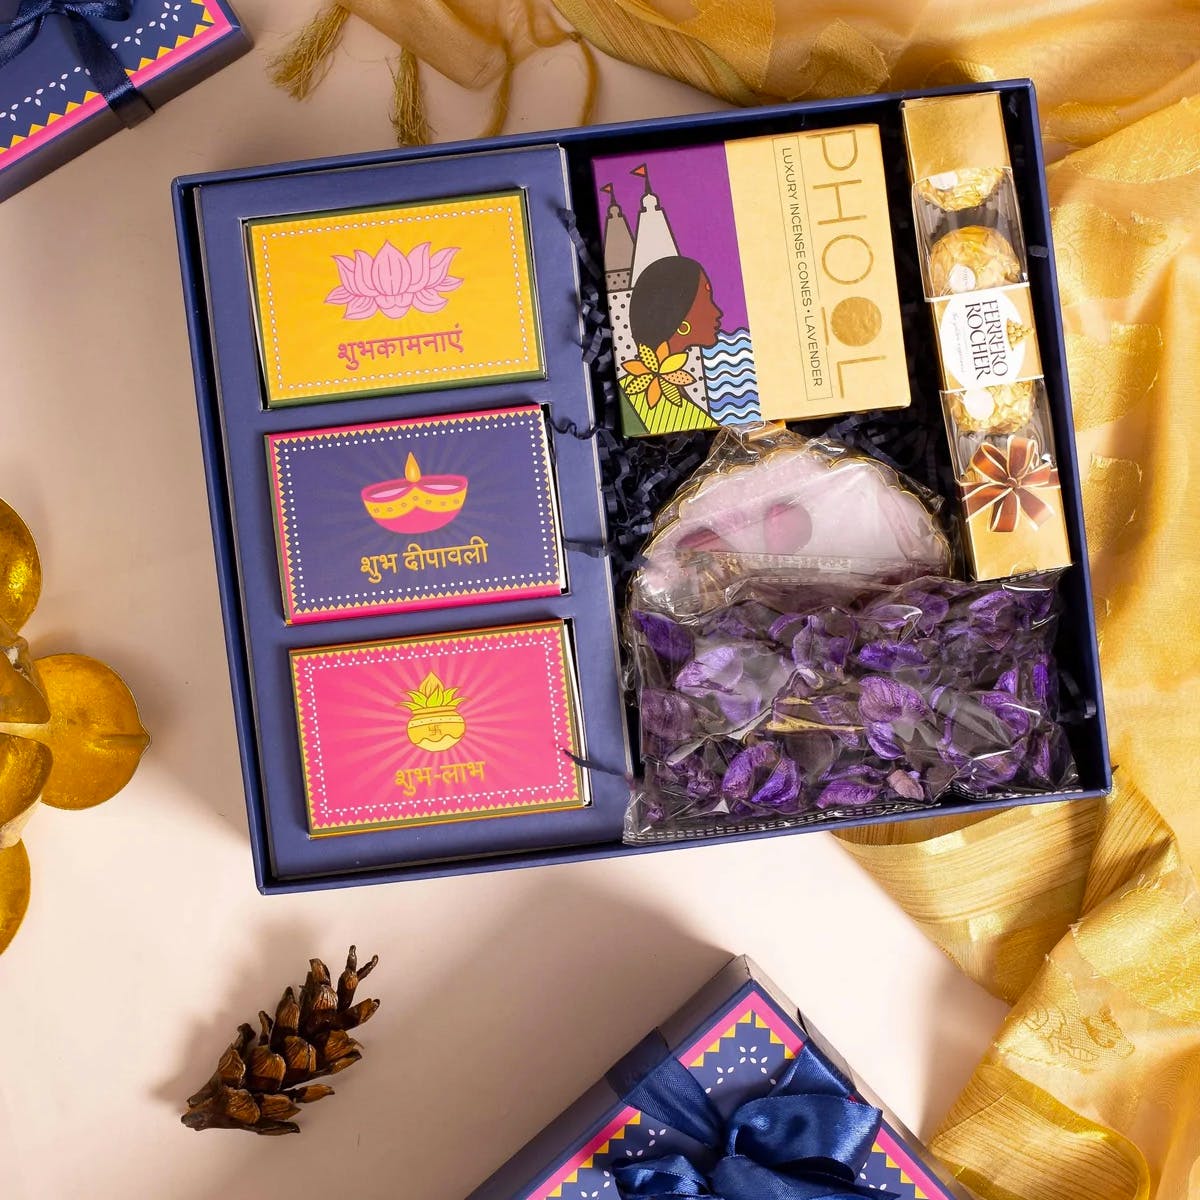 Introducing Phool Soumya Chandan Bambooless Incense Sticks, part of the Phool  Diwali Gift Boxes and an ode to Ayodhya's mythological lega... | Instagram